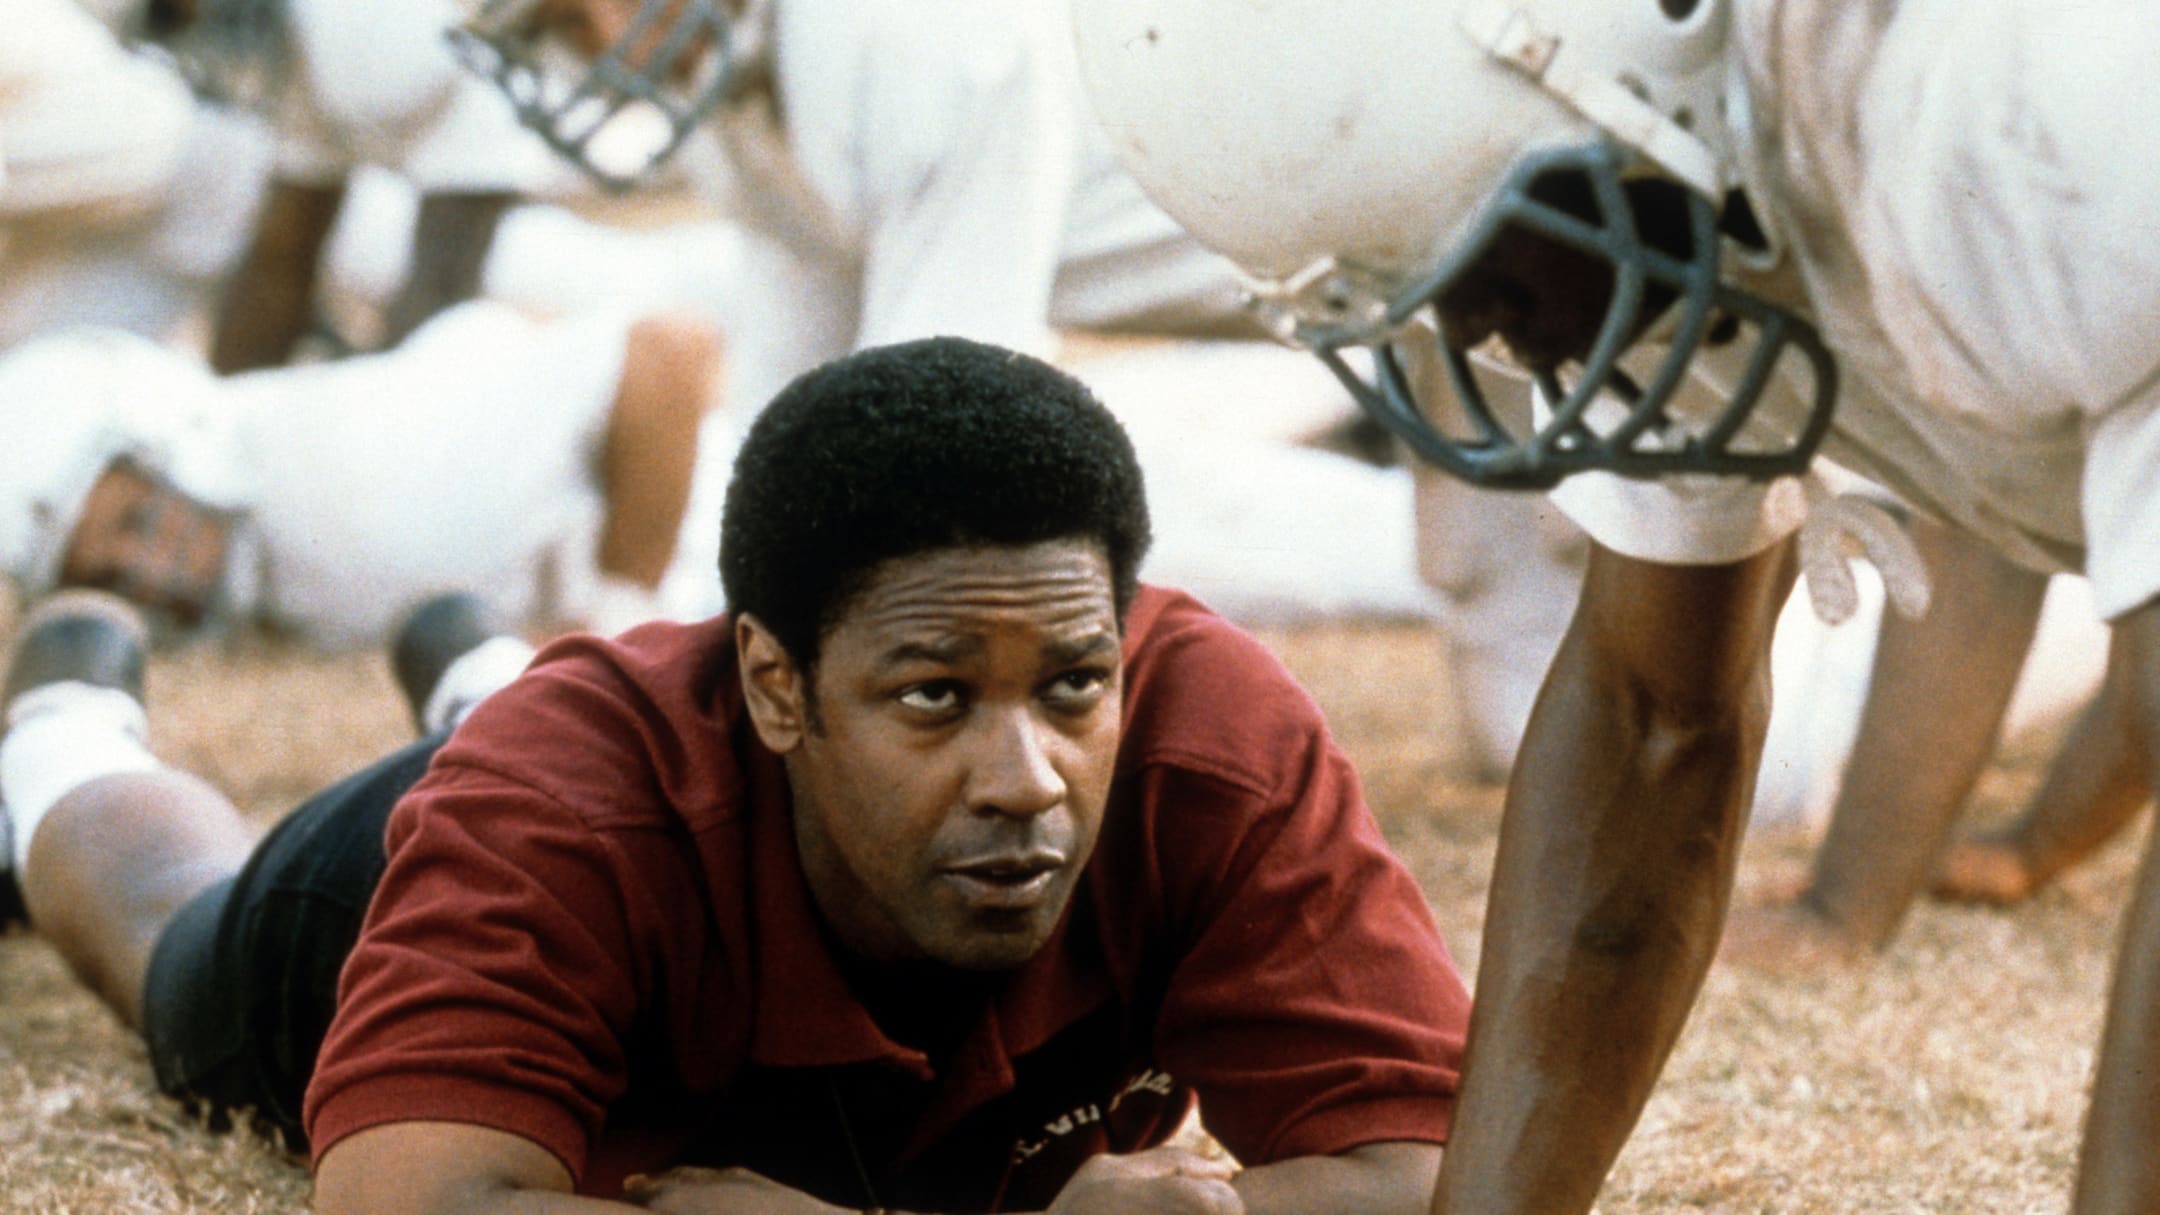 25 greatest sports movies based on a true story